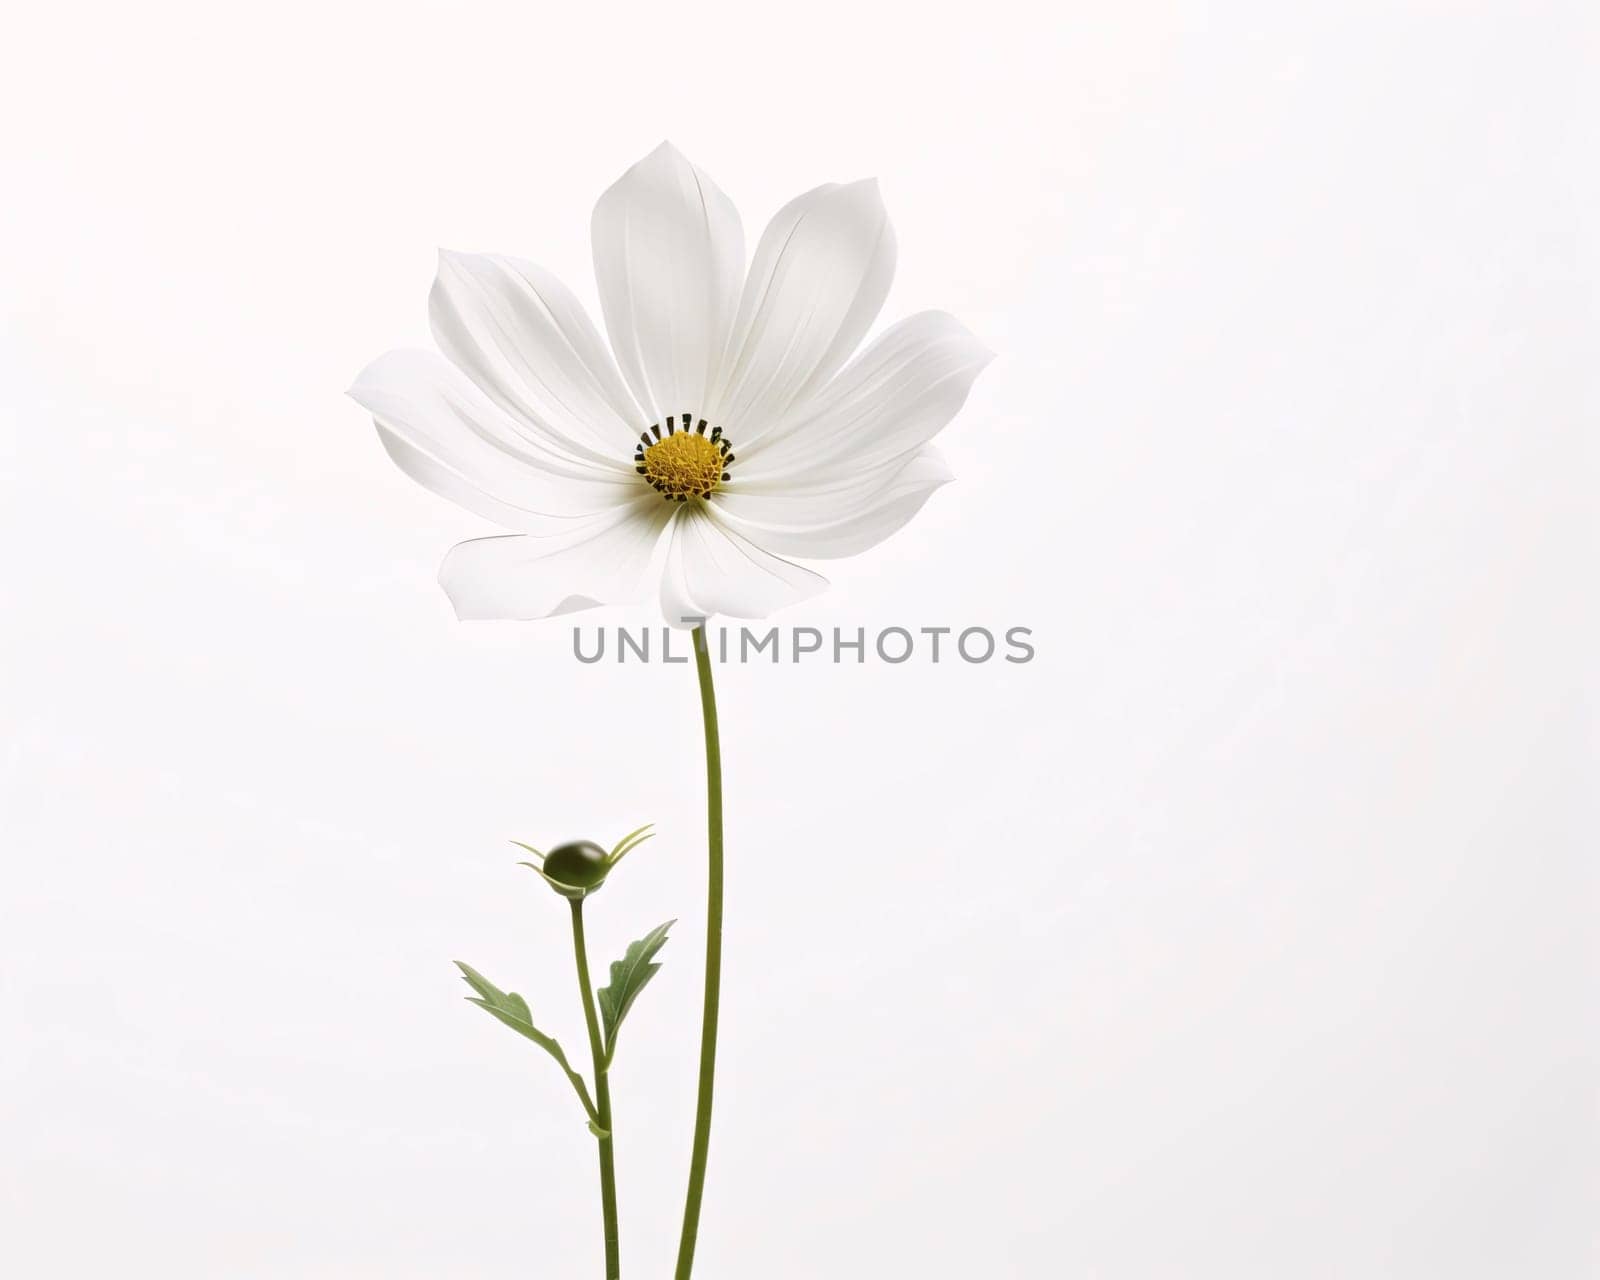 White flower with petals, daisy on white isolated background, green stem. Flowering flowers, a symbol of spring, new life. A joyful time of nature waking up to life.